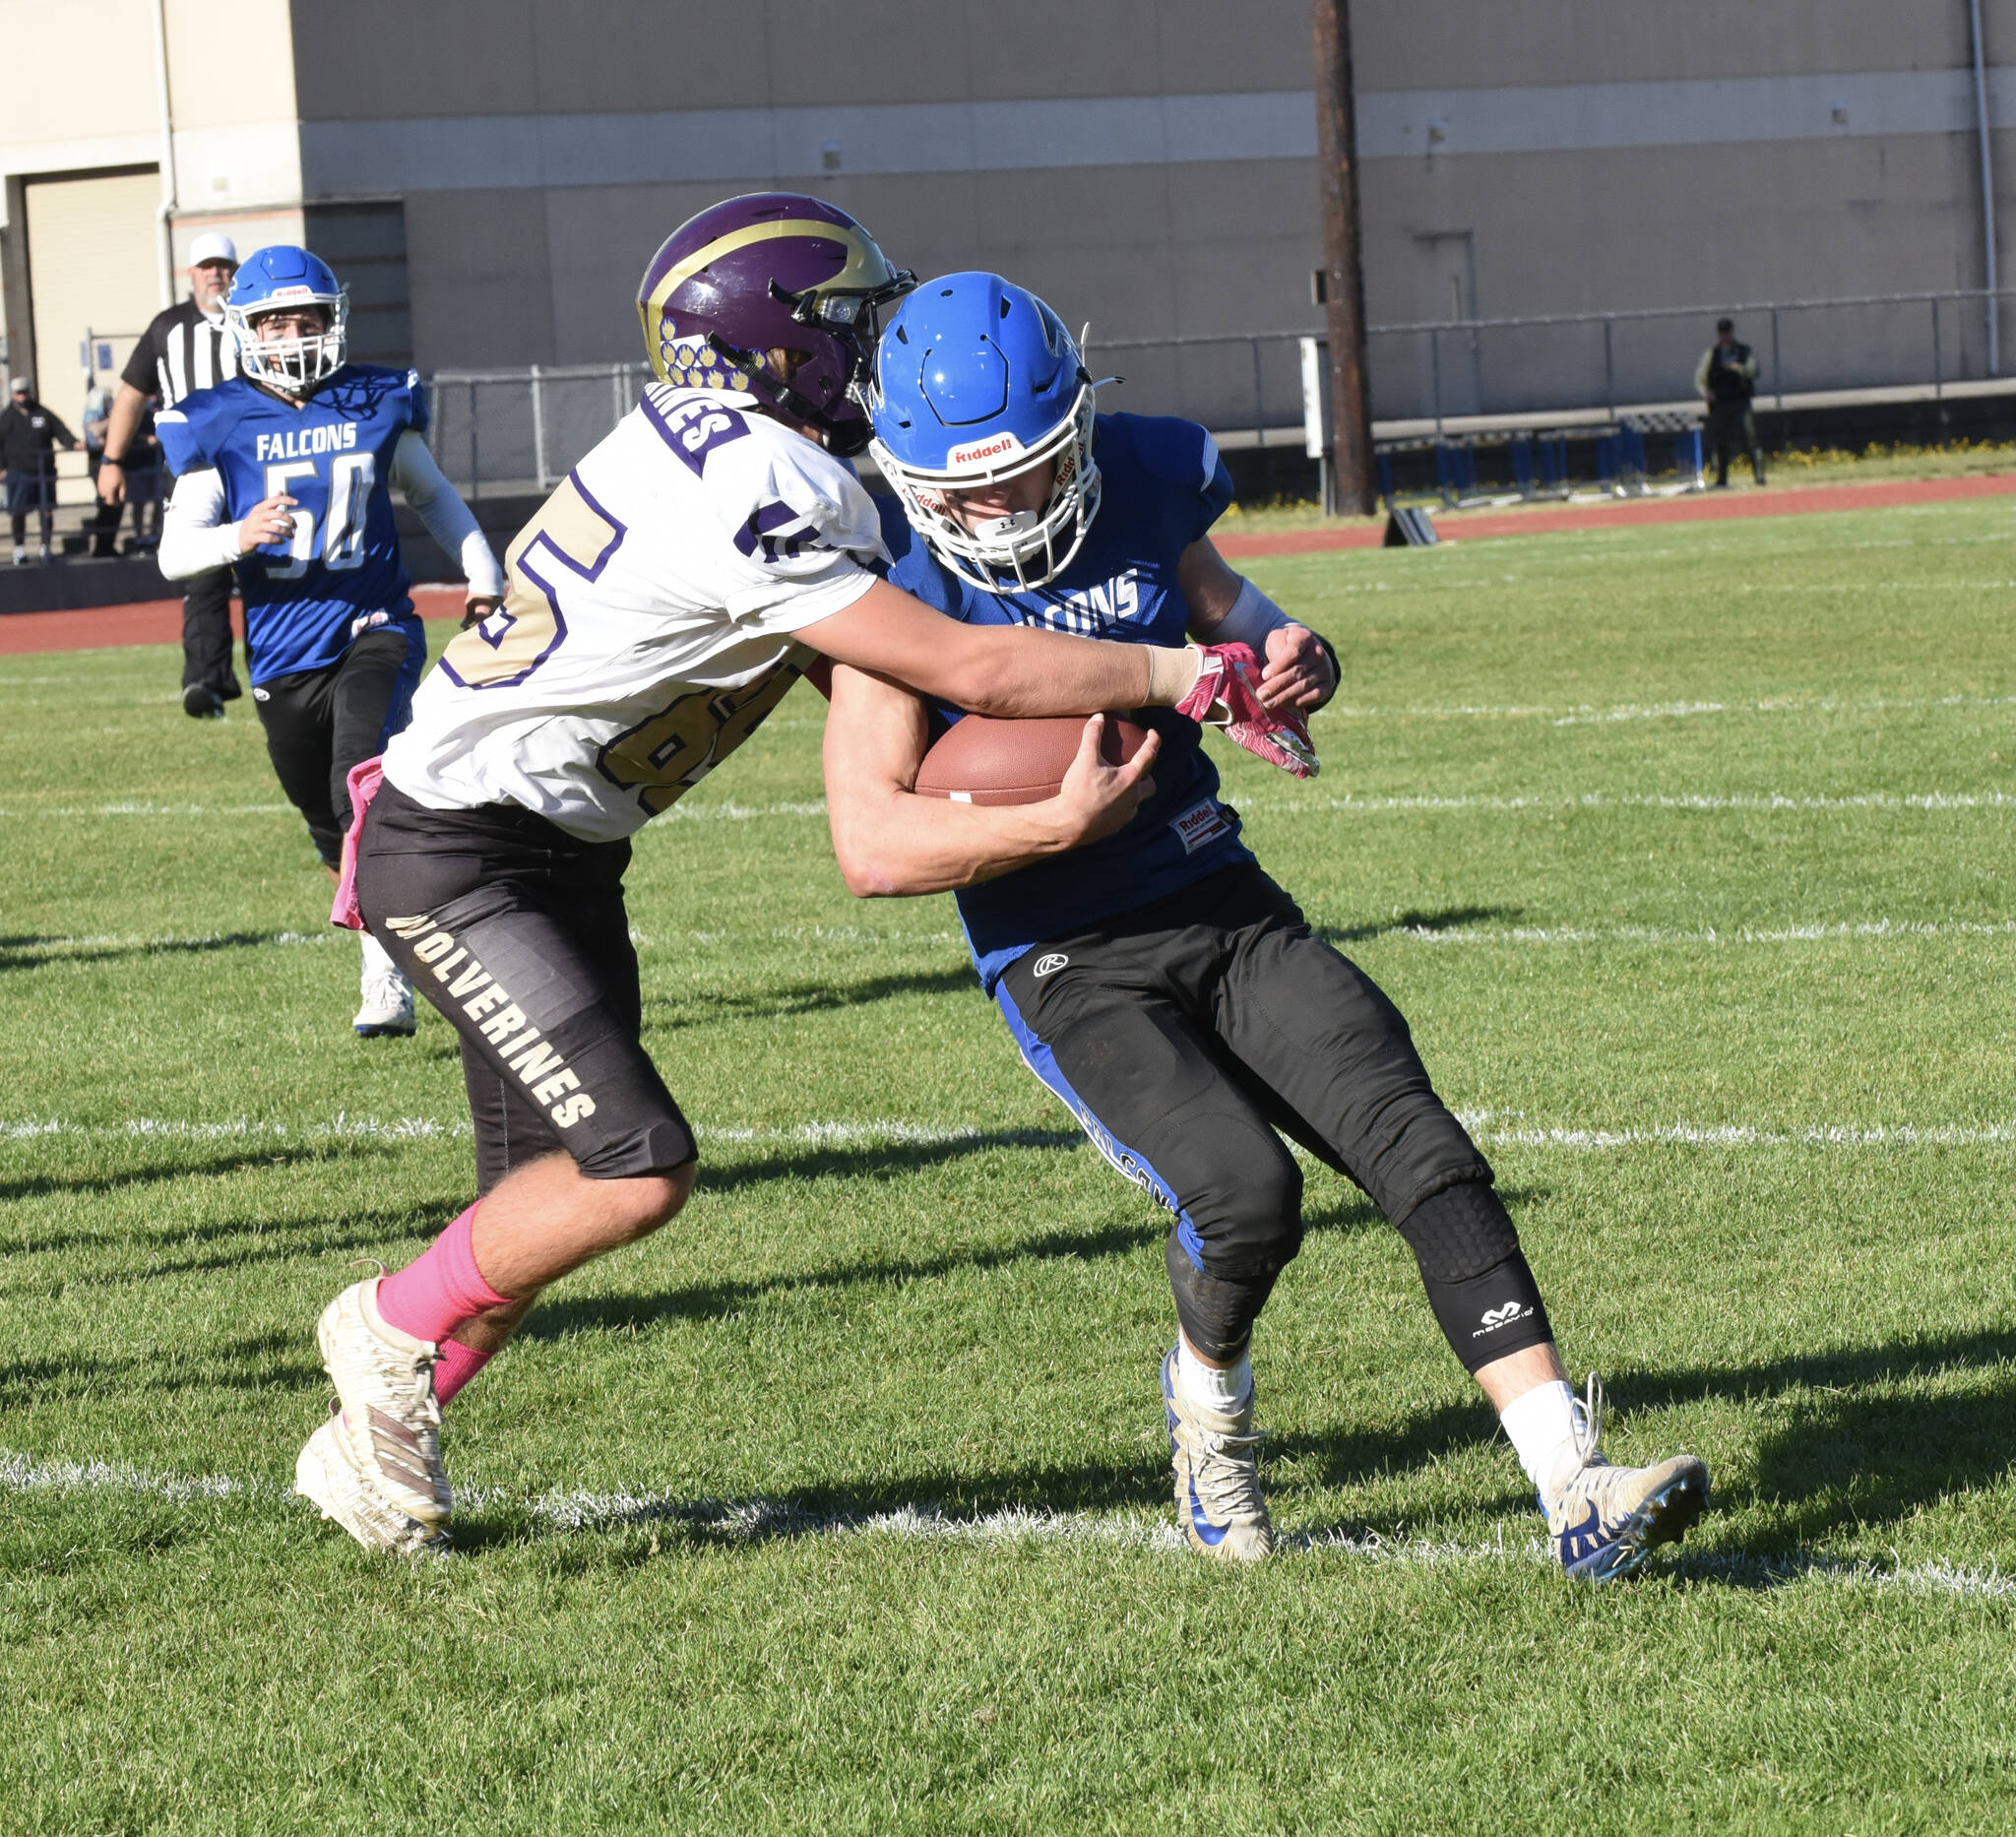 Wolverine Max Field, #65, forces Falcon running back out of bounds. (John Stimpson photo)